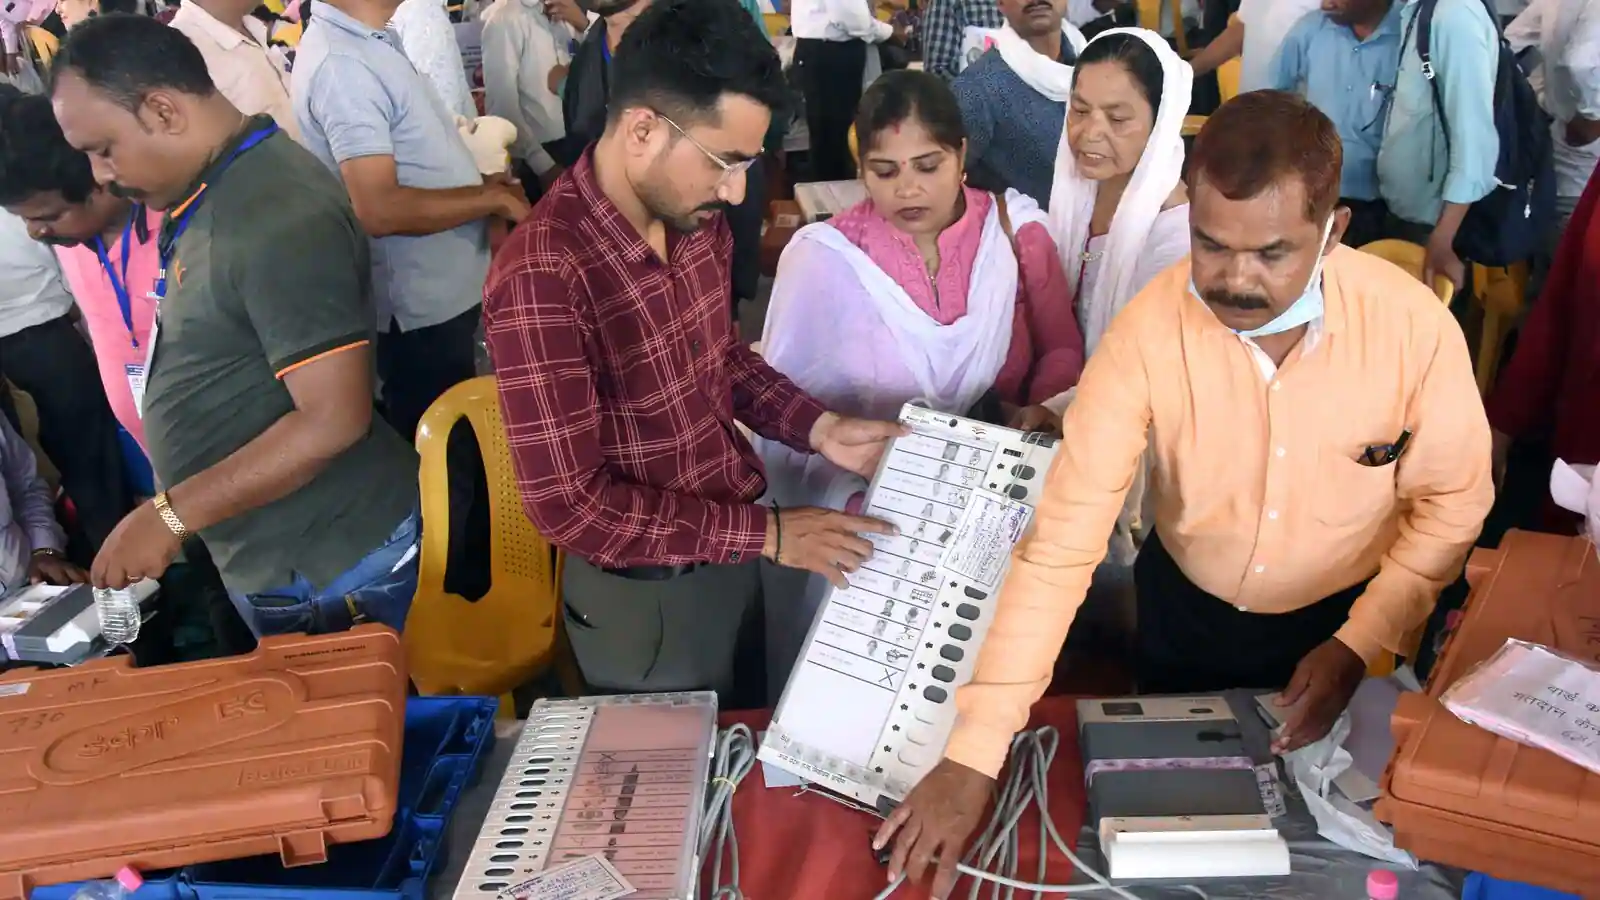 Those above 17 years of age but not yet 18 can register in advance as Voters: Election Commission - Asiana Times